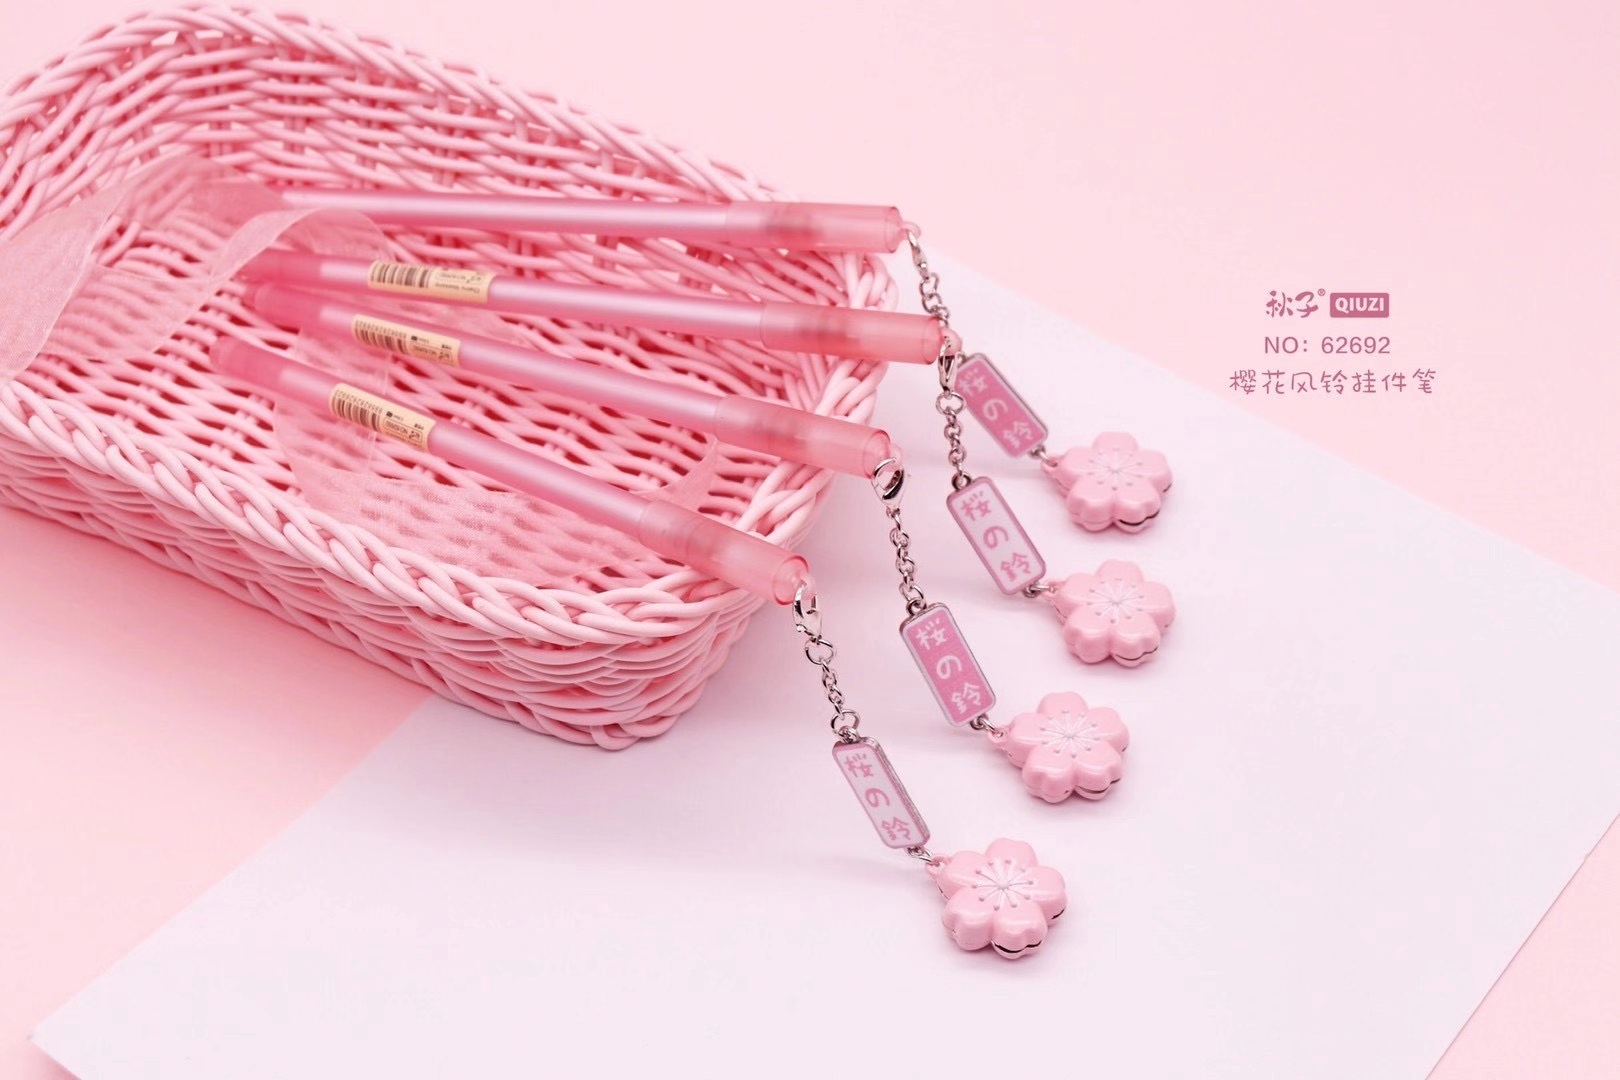 62692 4 Cherry Blossom Gel PensCherry Blossom Fan Roller ball pen Pendants Ancient style female Girlish heart delicate lovely originality solar system ins decompression Super cute Water pen